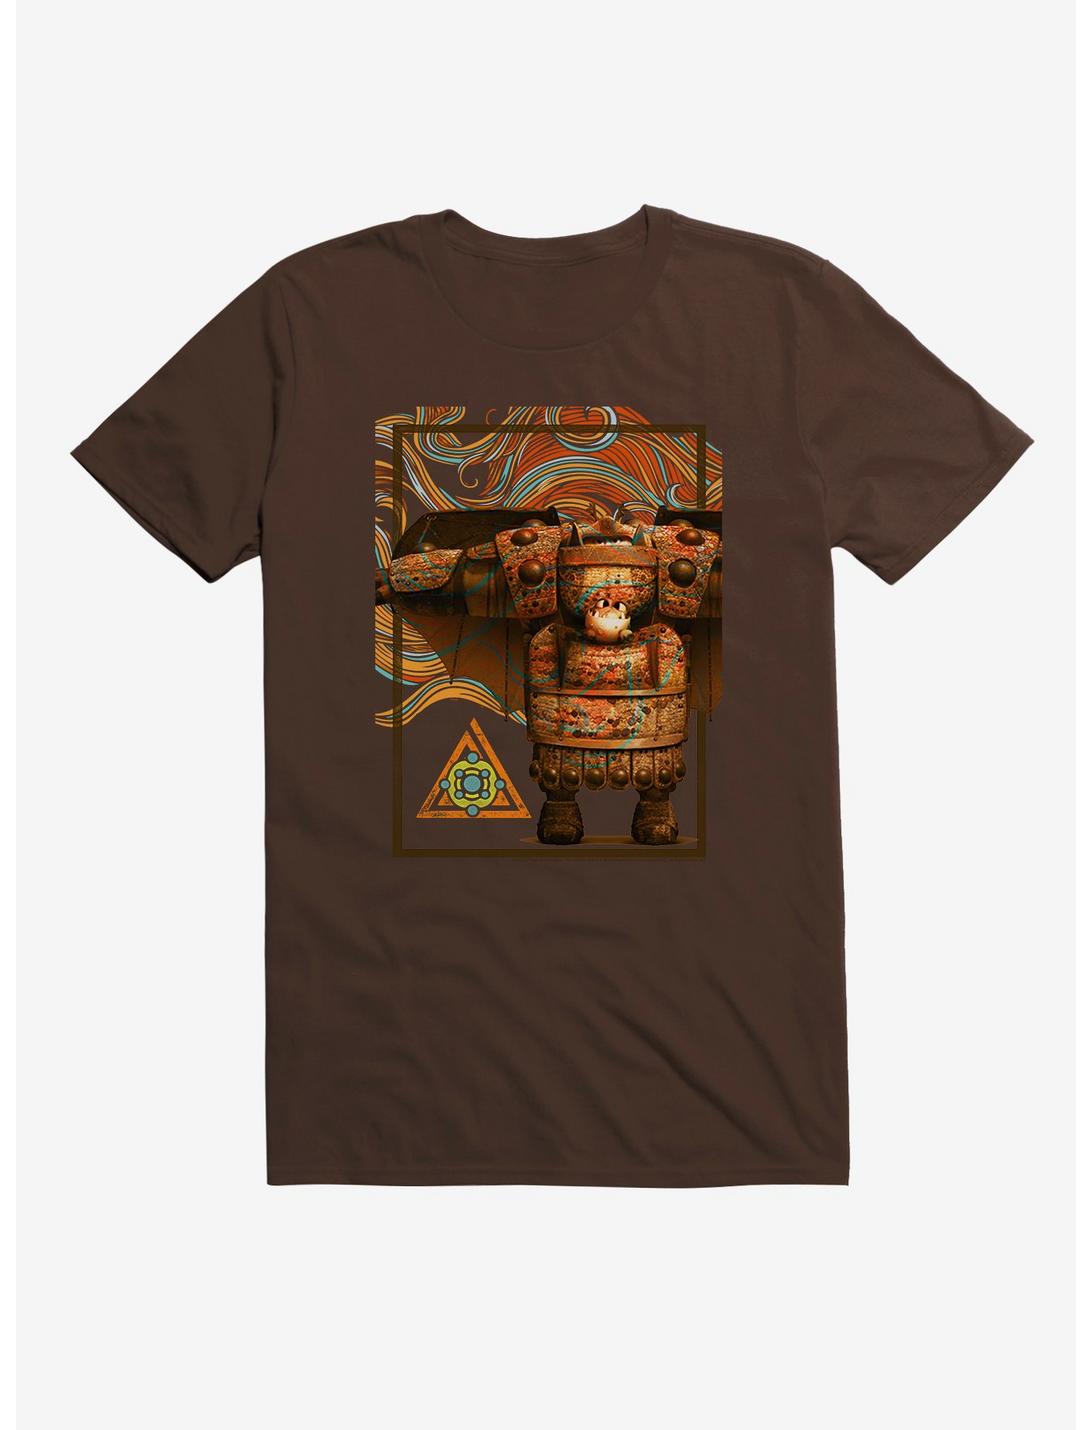 How To Train Your Dragon Fishlegs T-Shirt, DK CHOCOLATE, hi-res